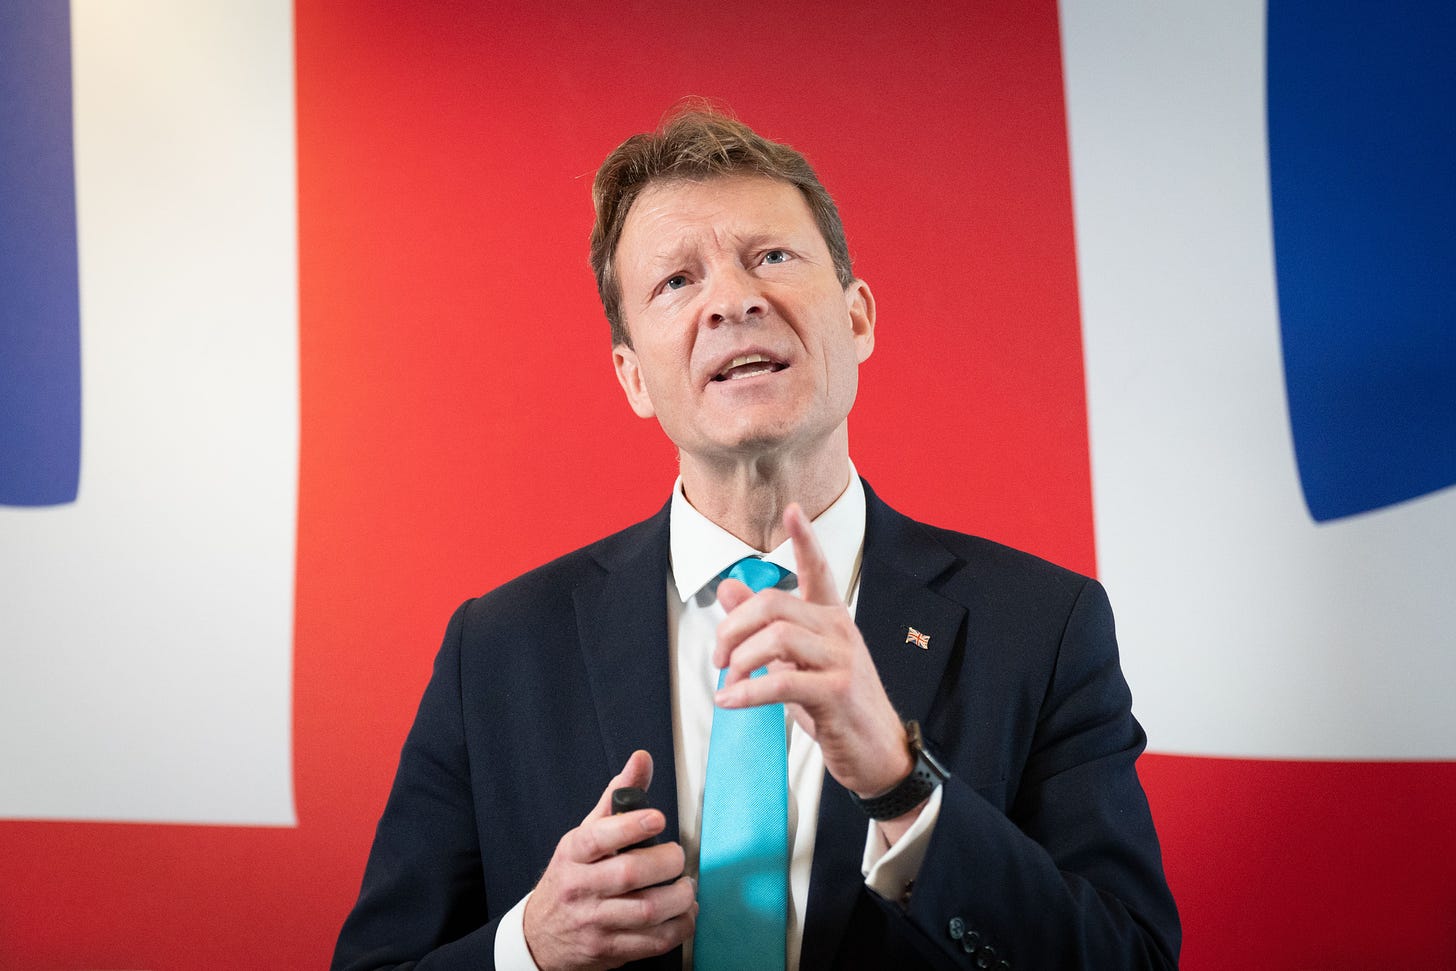 Reform UK leader tells candidates not to tweet when drunk after racist  posts | The Independent